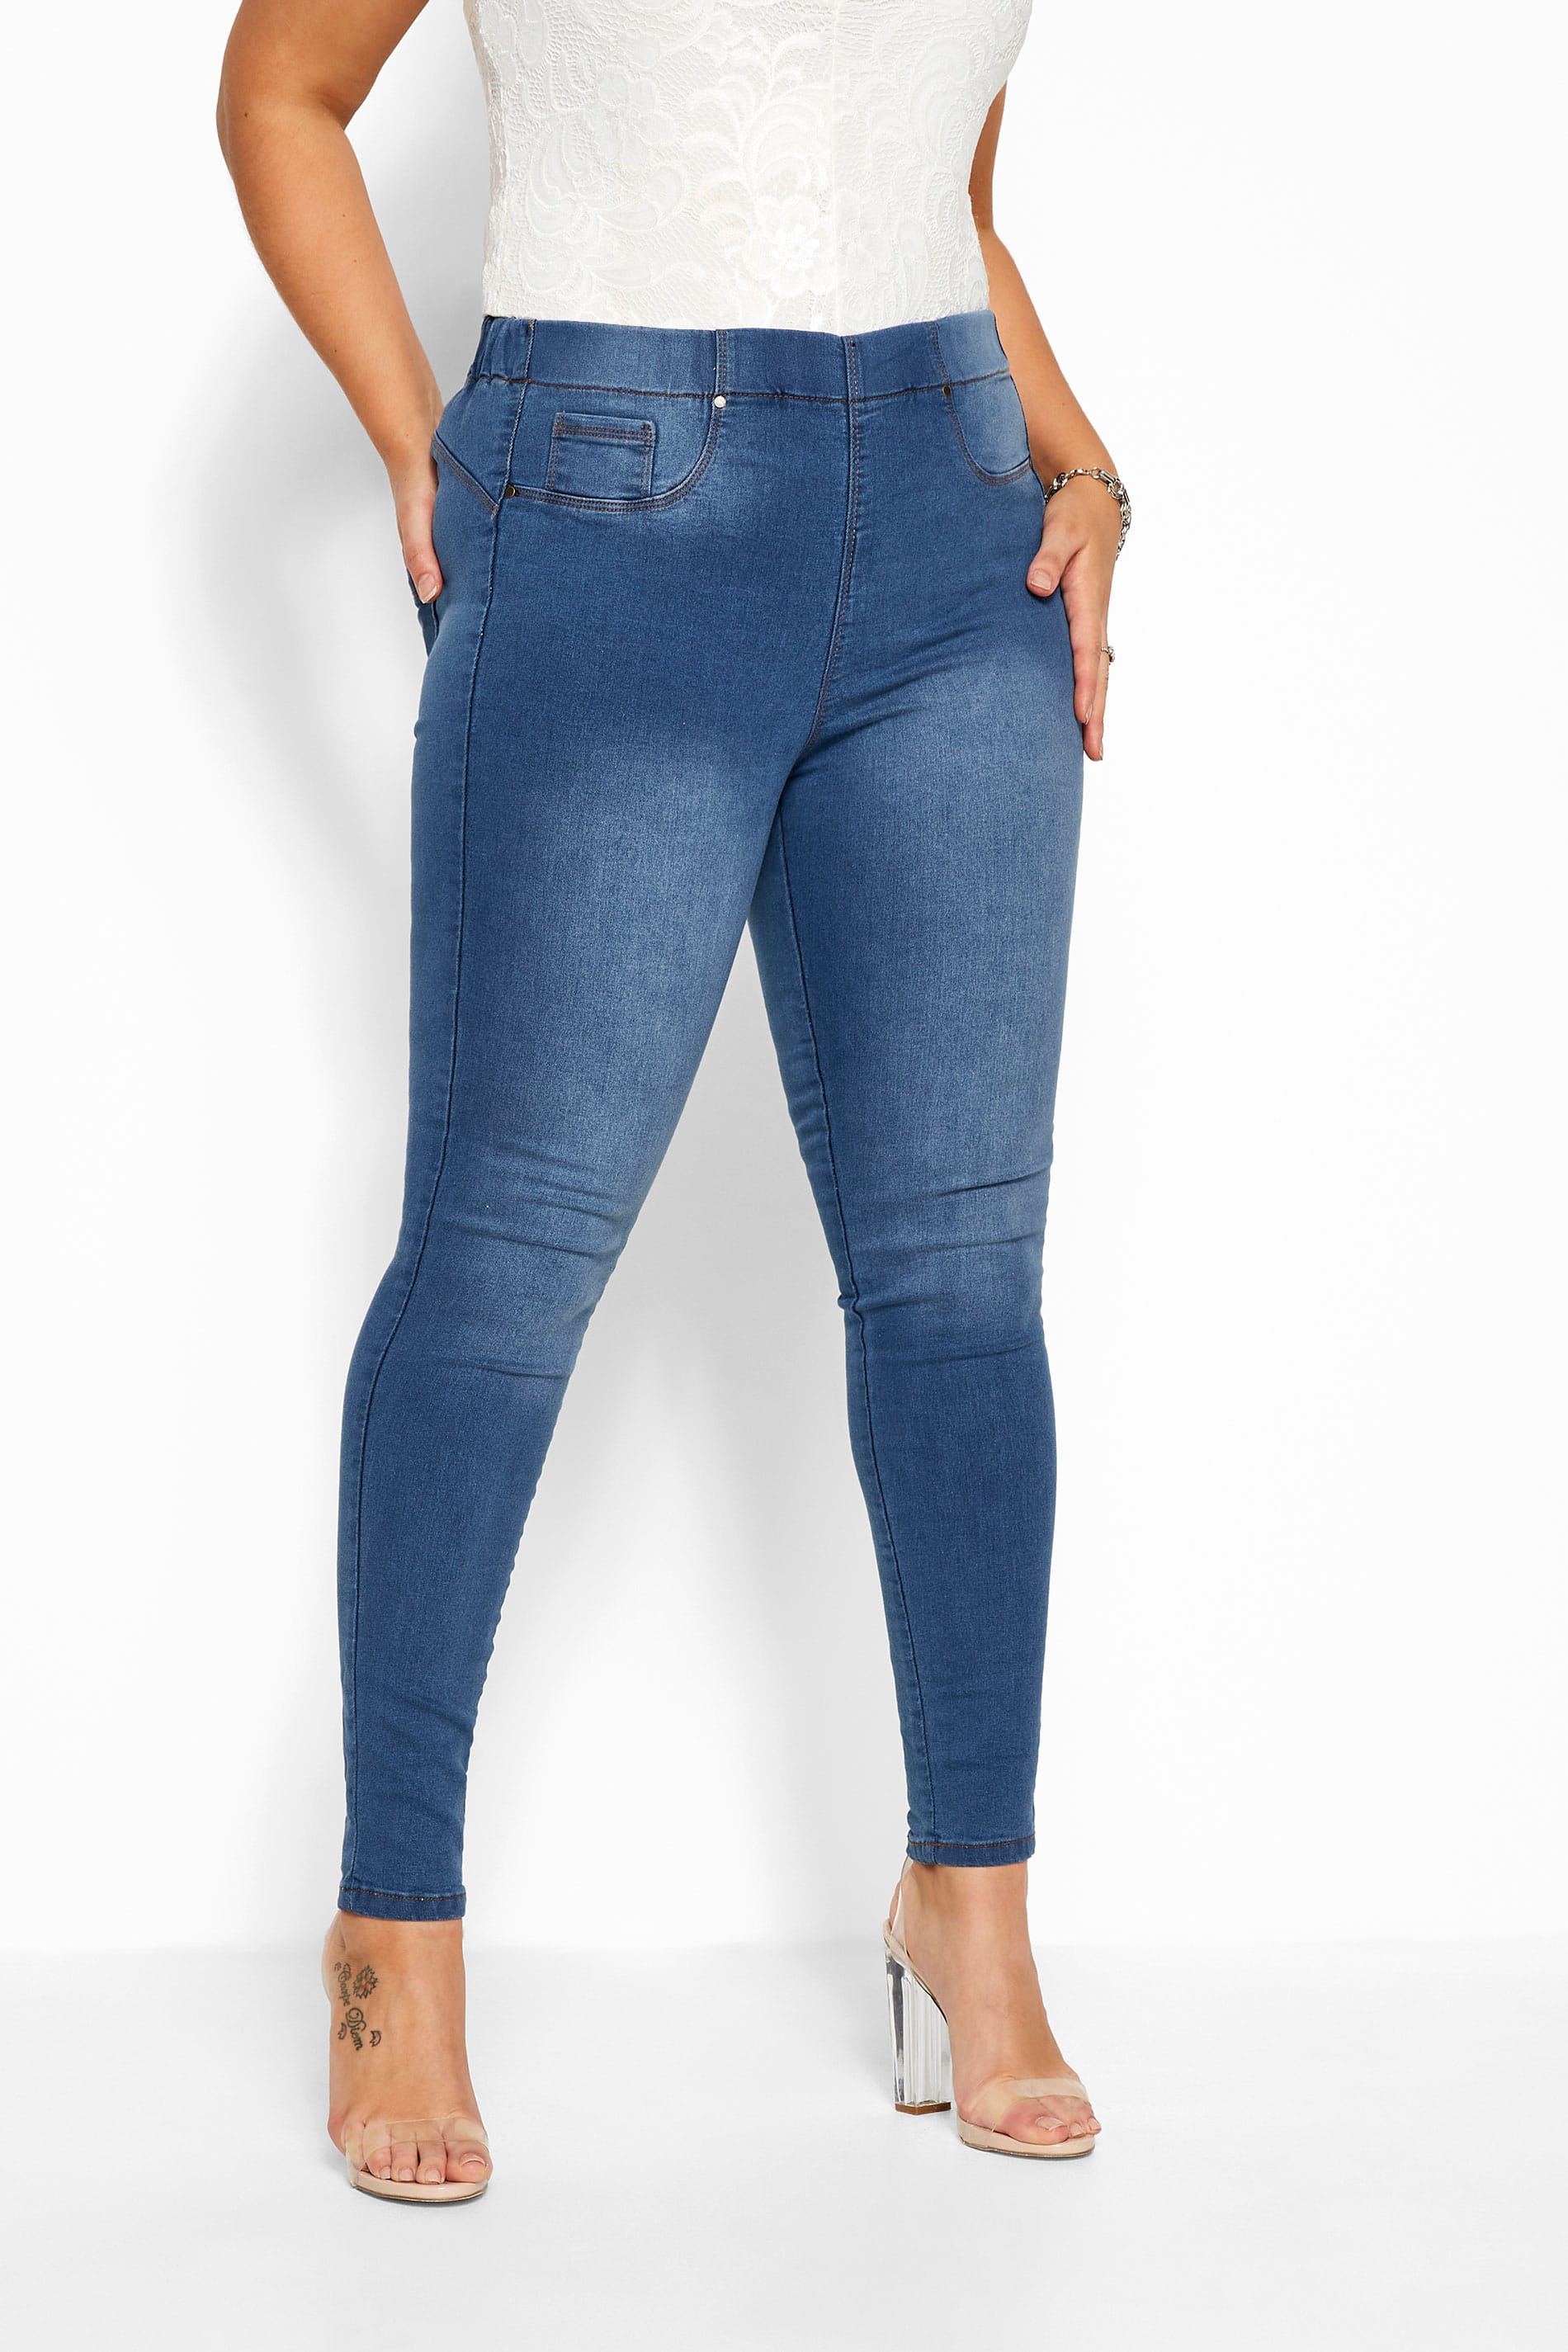 Blue Slacks and Chinos Skinny trousers Womens Clothing Trousers Boohoo Denim Elasticated Shaper Jeggings in Mid Wash 